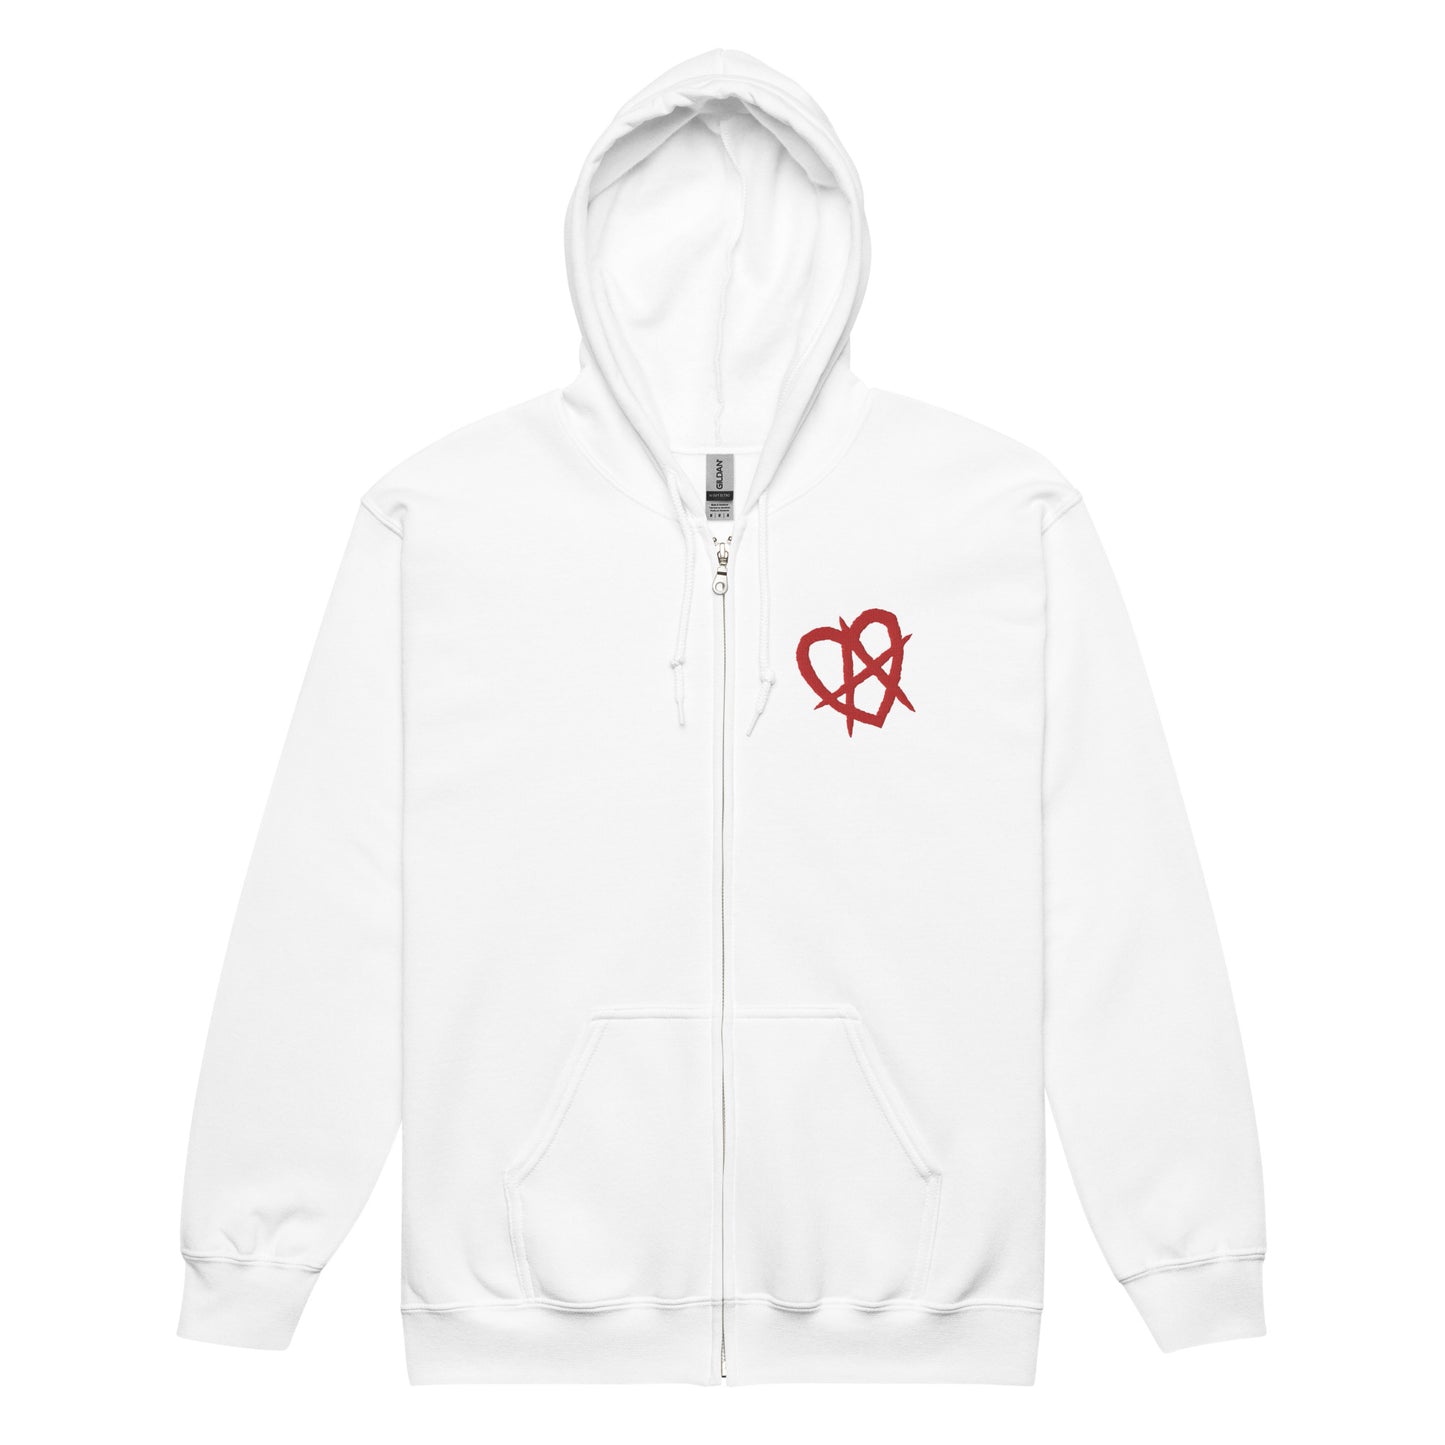 The Montauk Affect Embroidered Unisex Anarchy Heart Zip Up Hoodie